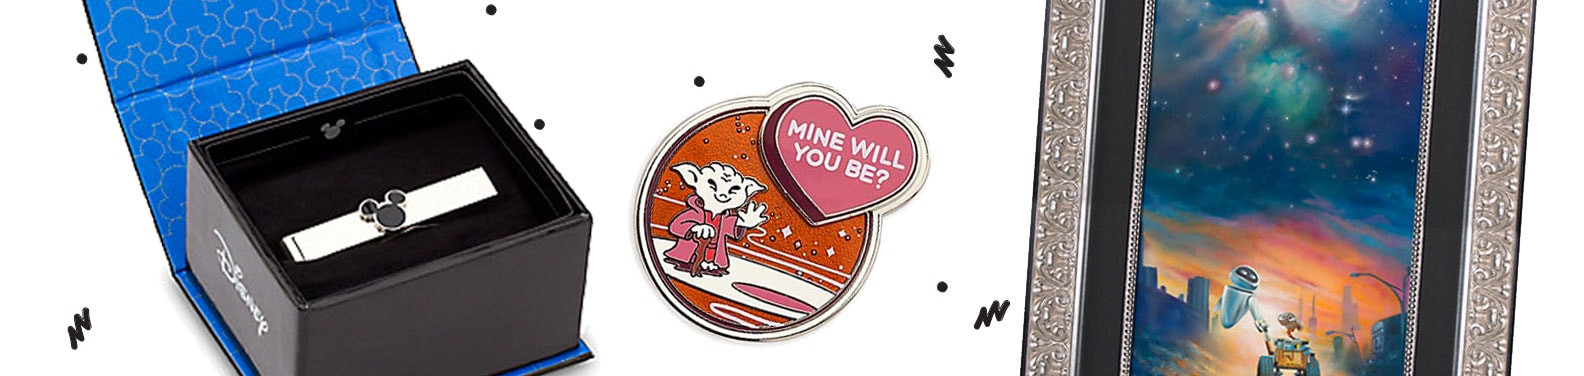 Disney Valentines Day Gifts
 The Ultimate Disney Valentine’s Day Gift Guide For Your